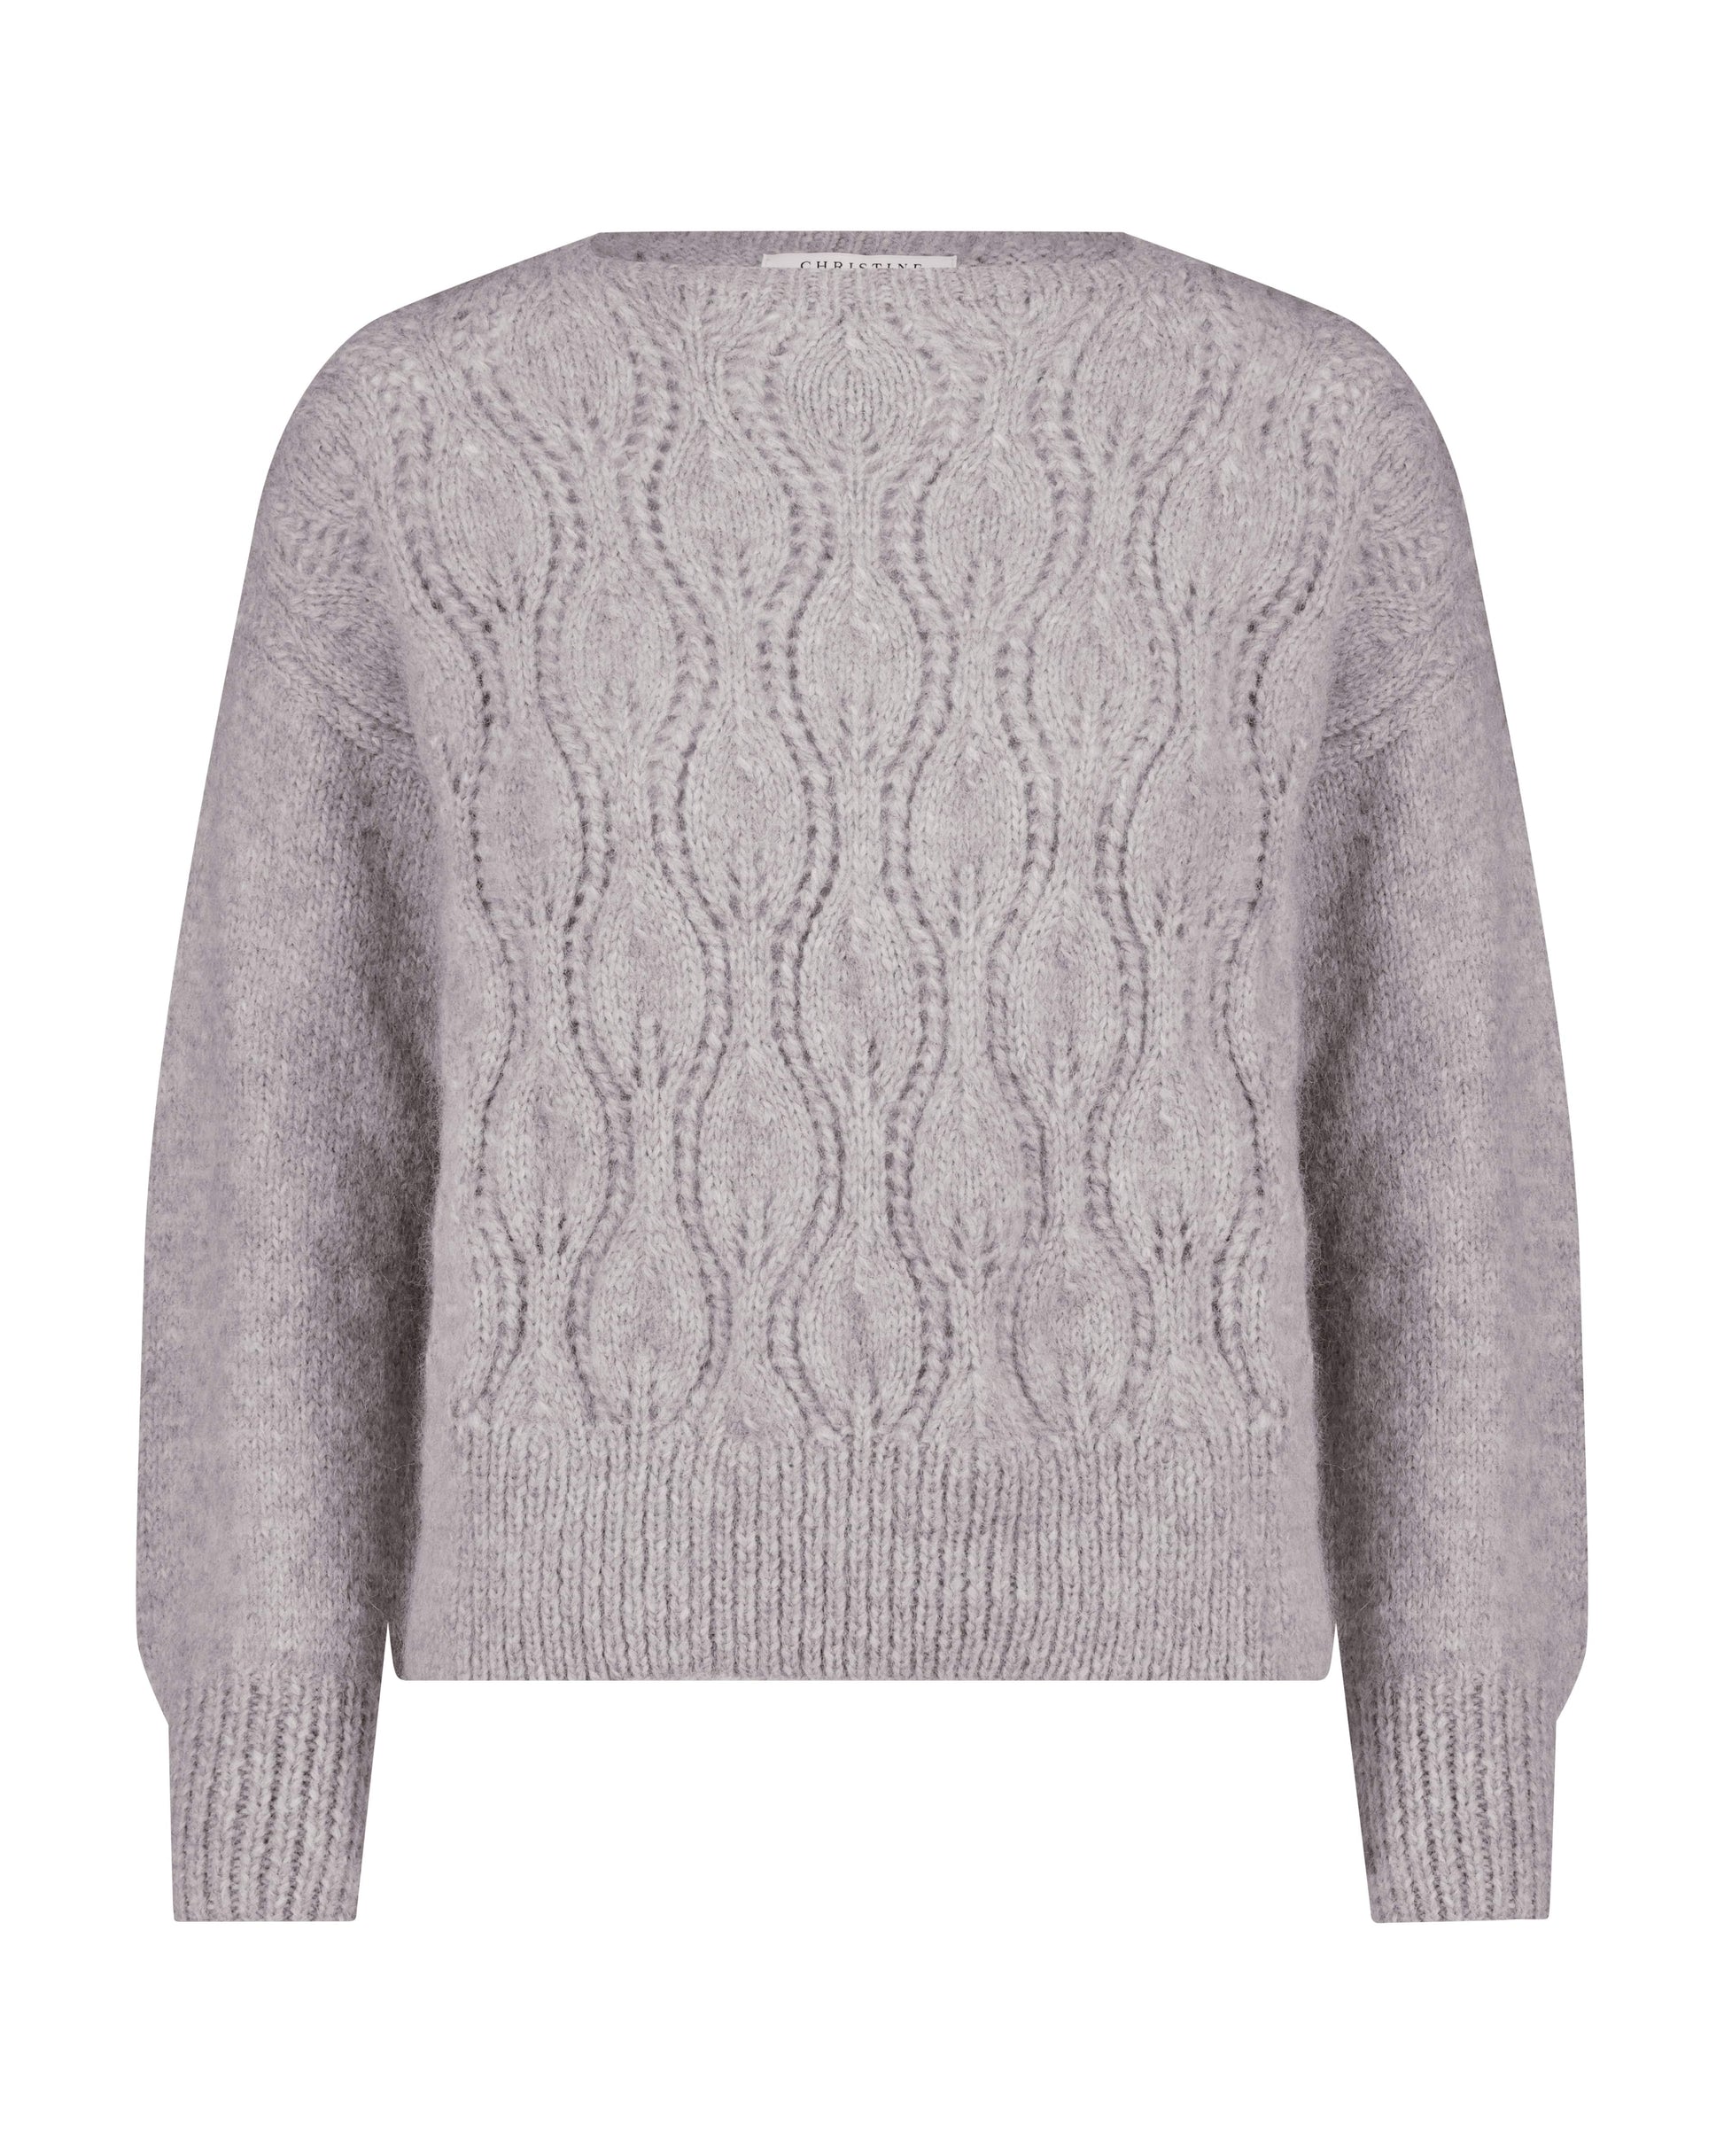 Mildred Sweater in Alpaca Blend Sweaters CHRISTINE ALCALAY   